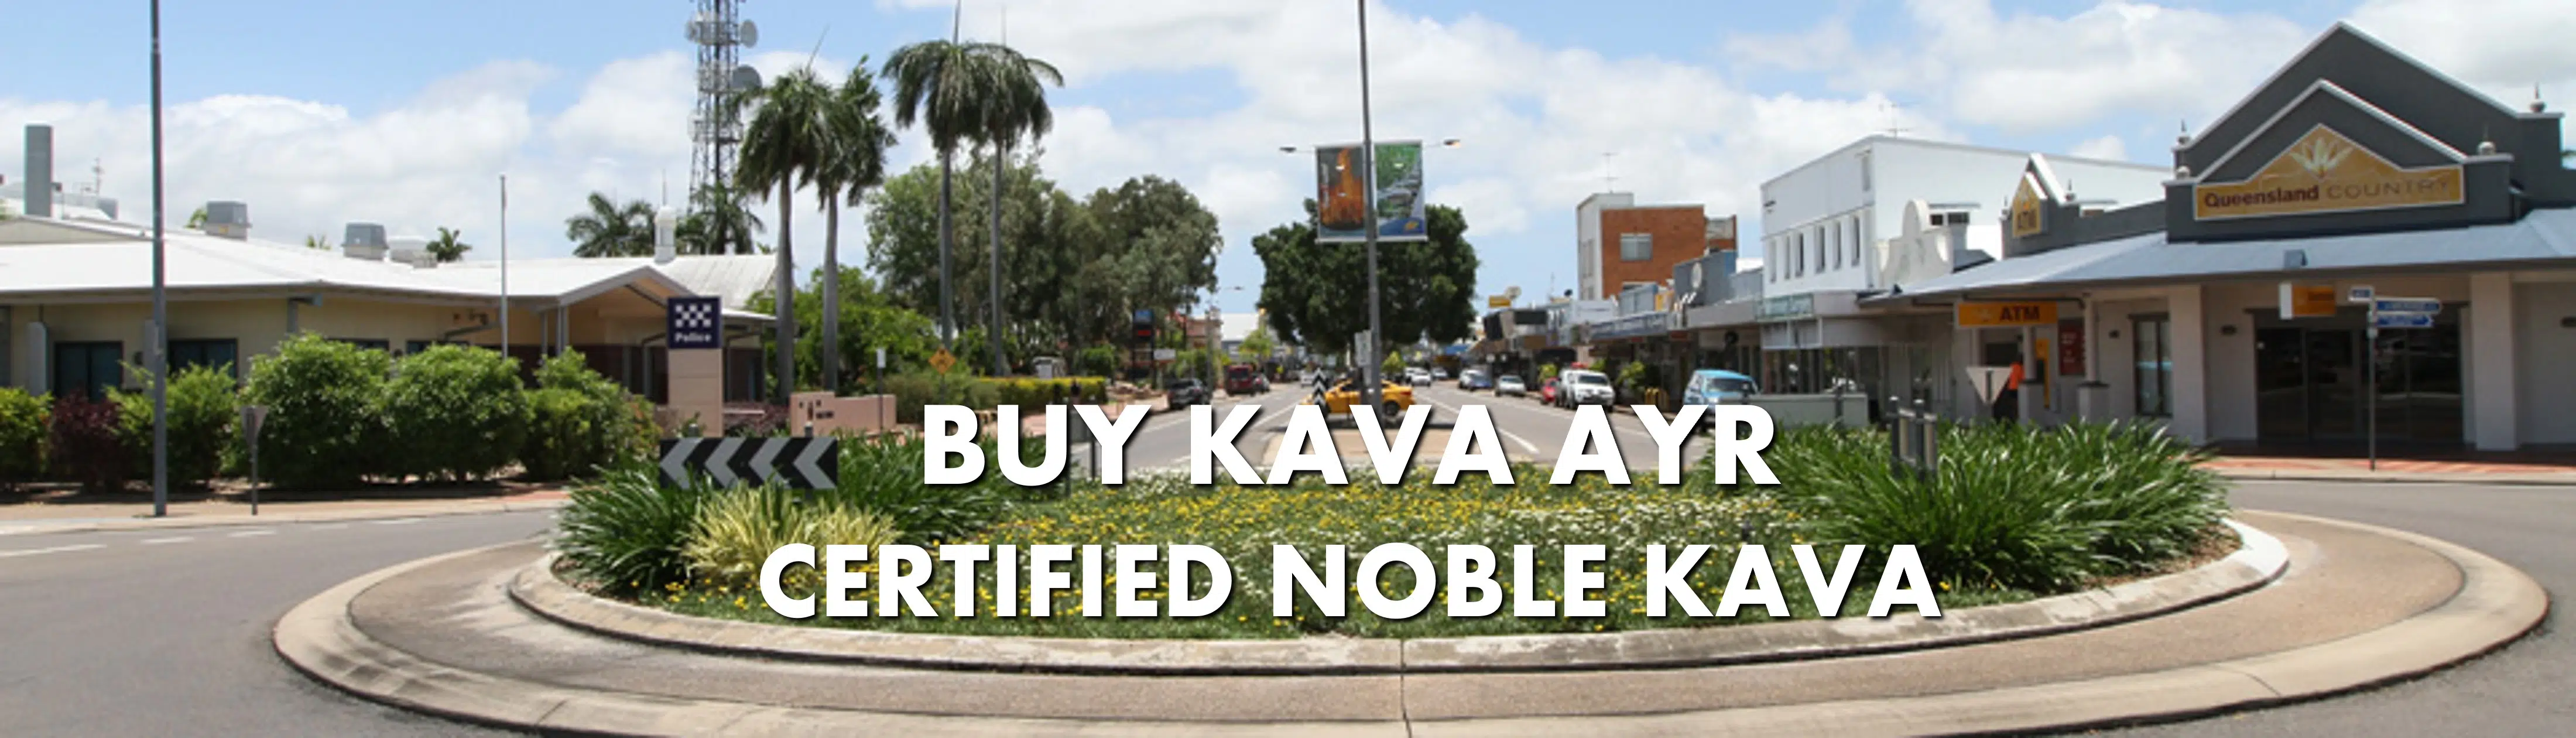 Streetscape in Ayr Queensland with caption Buy Kava Ayr Certified Noble Kava